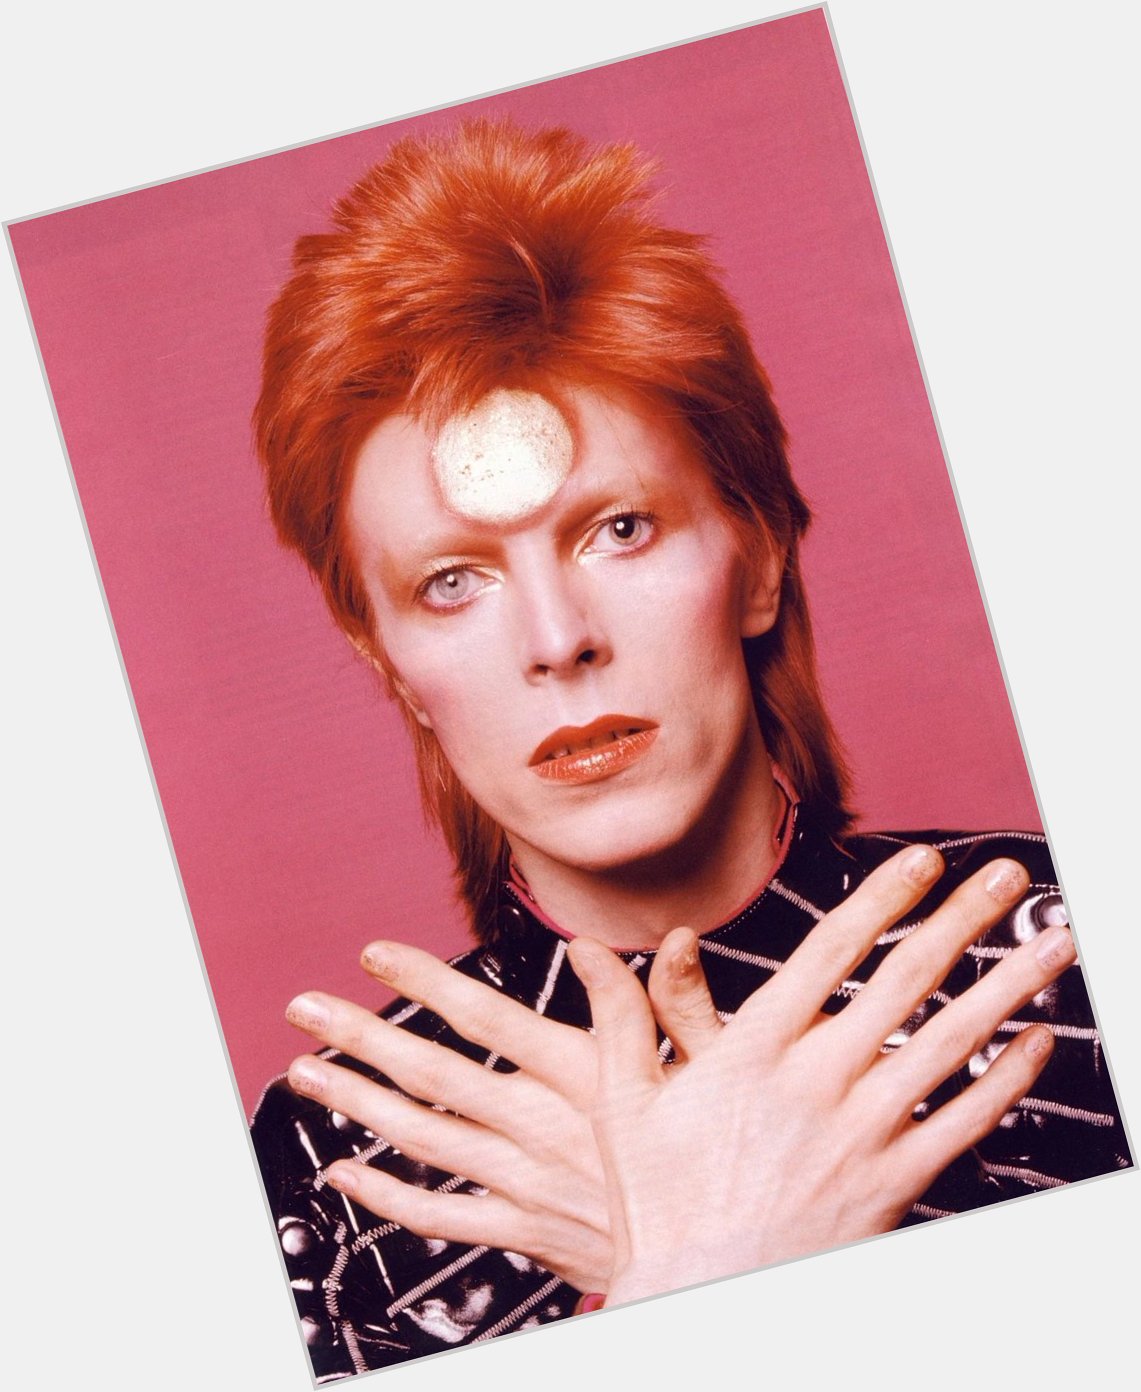 Happy birthday to the legendary David Bowie, who would have turned 76 today. 